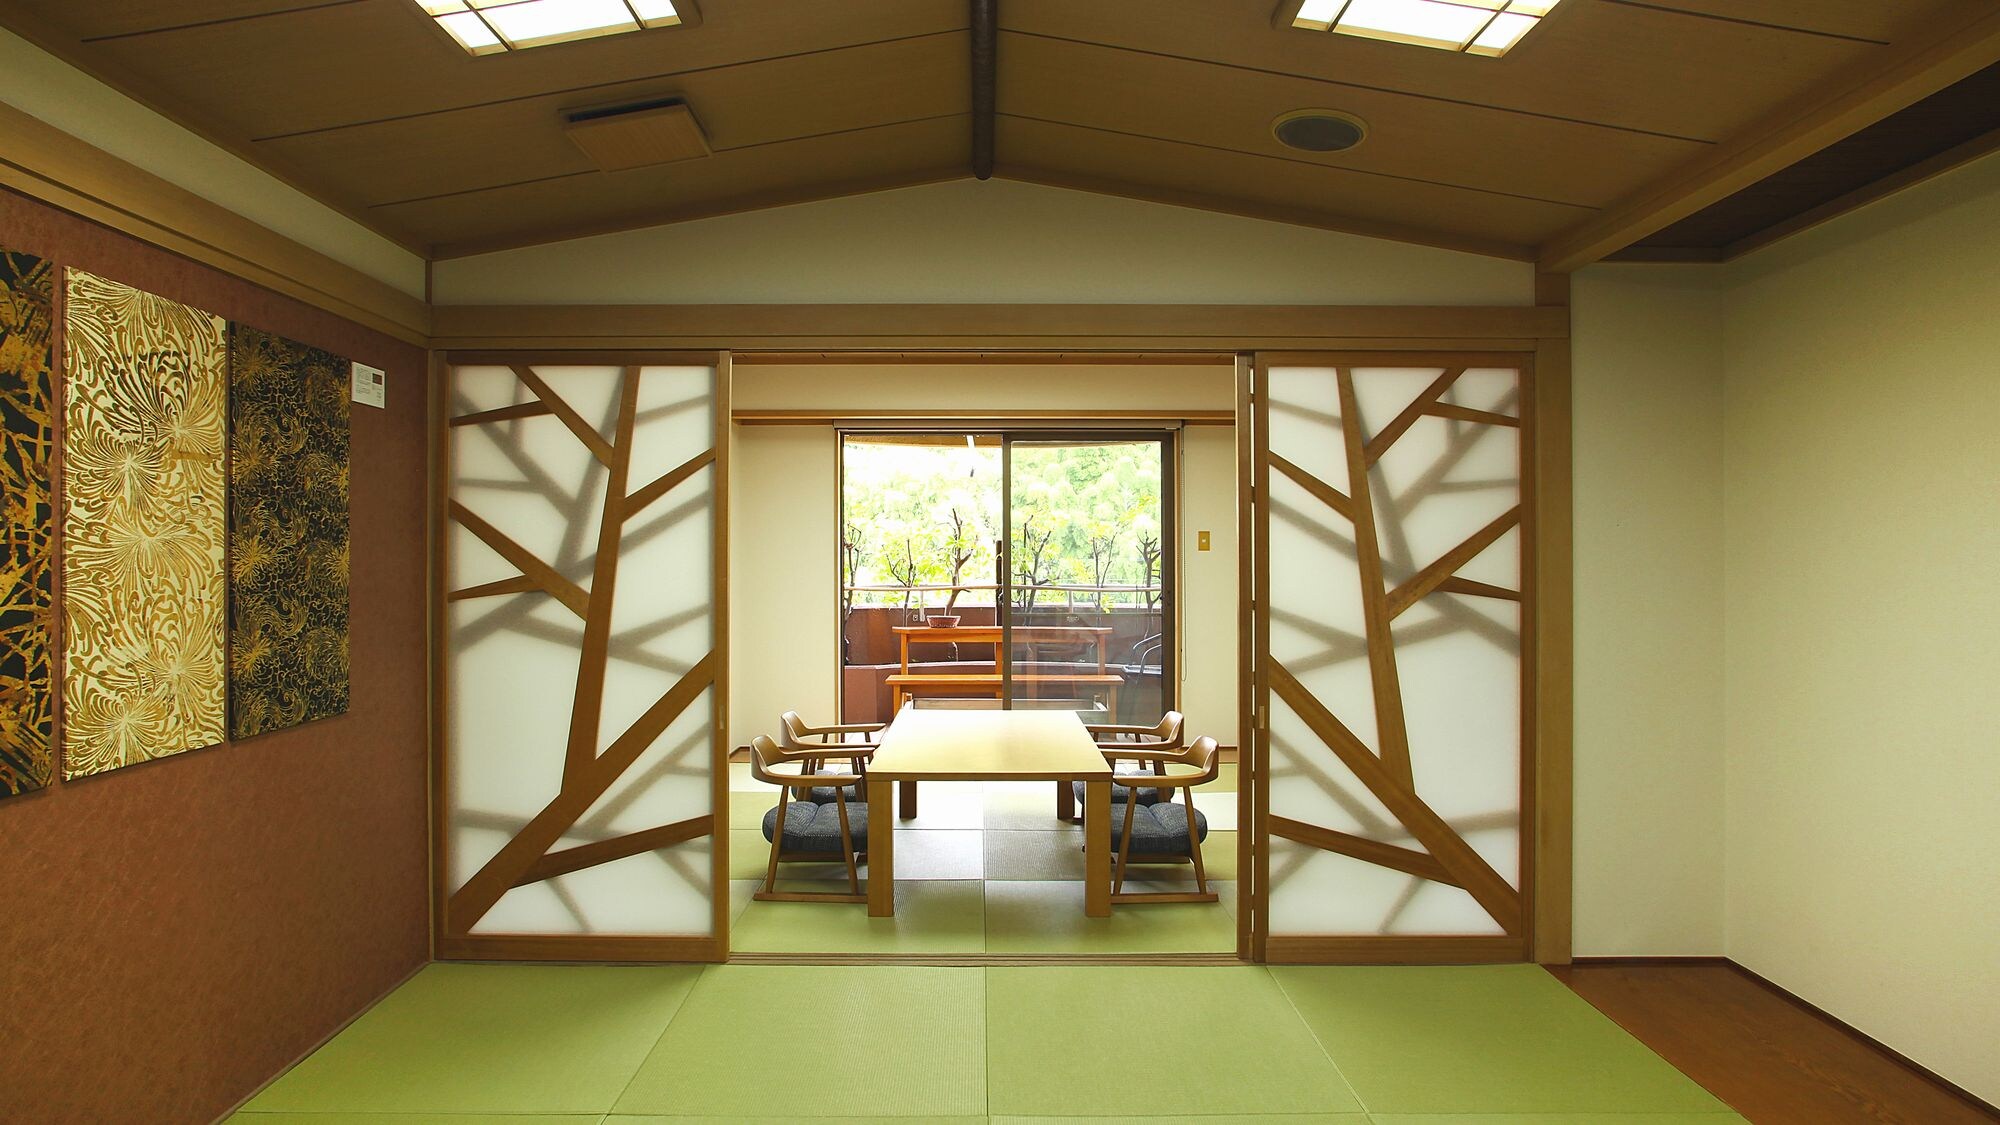 ◆ A two-room room with a footbath. It is a spacious room.